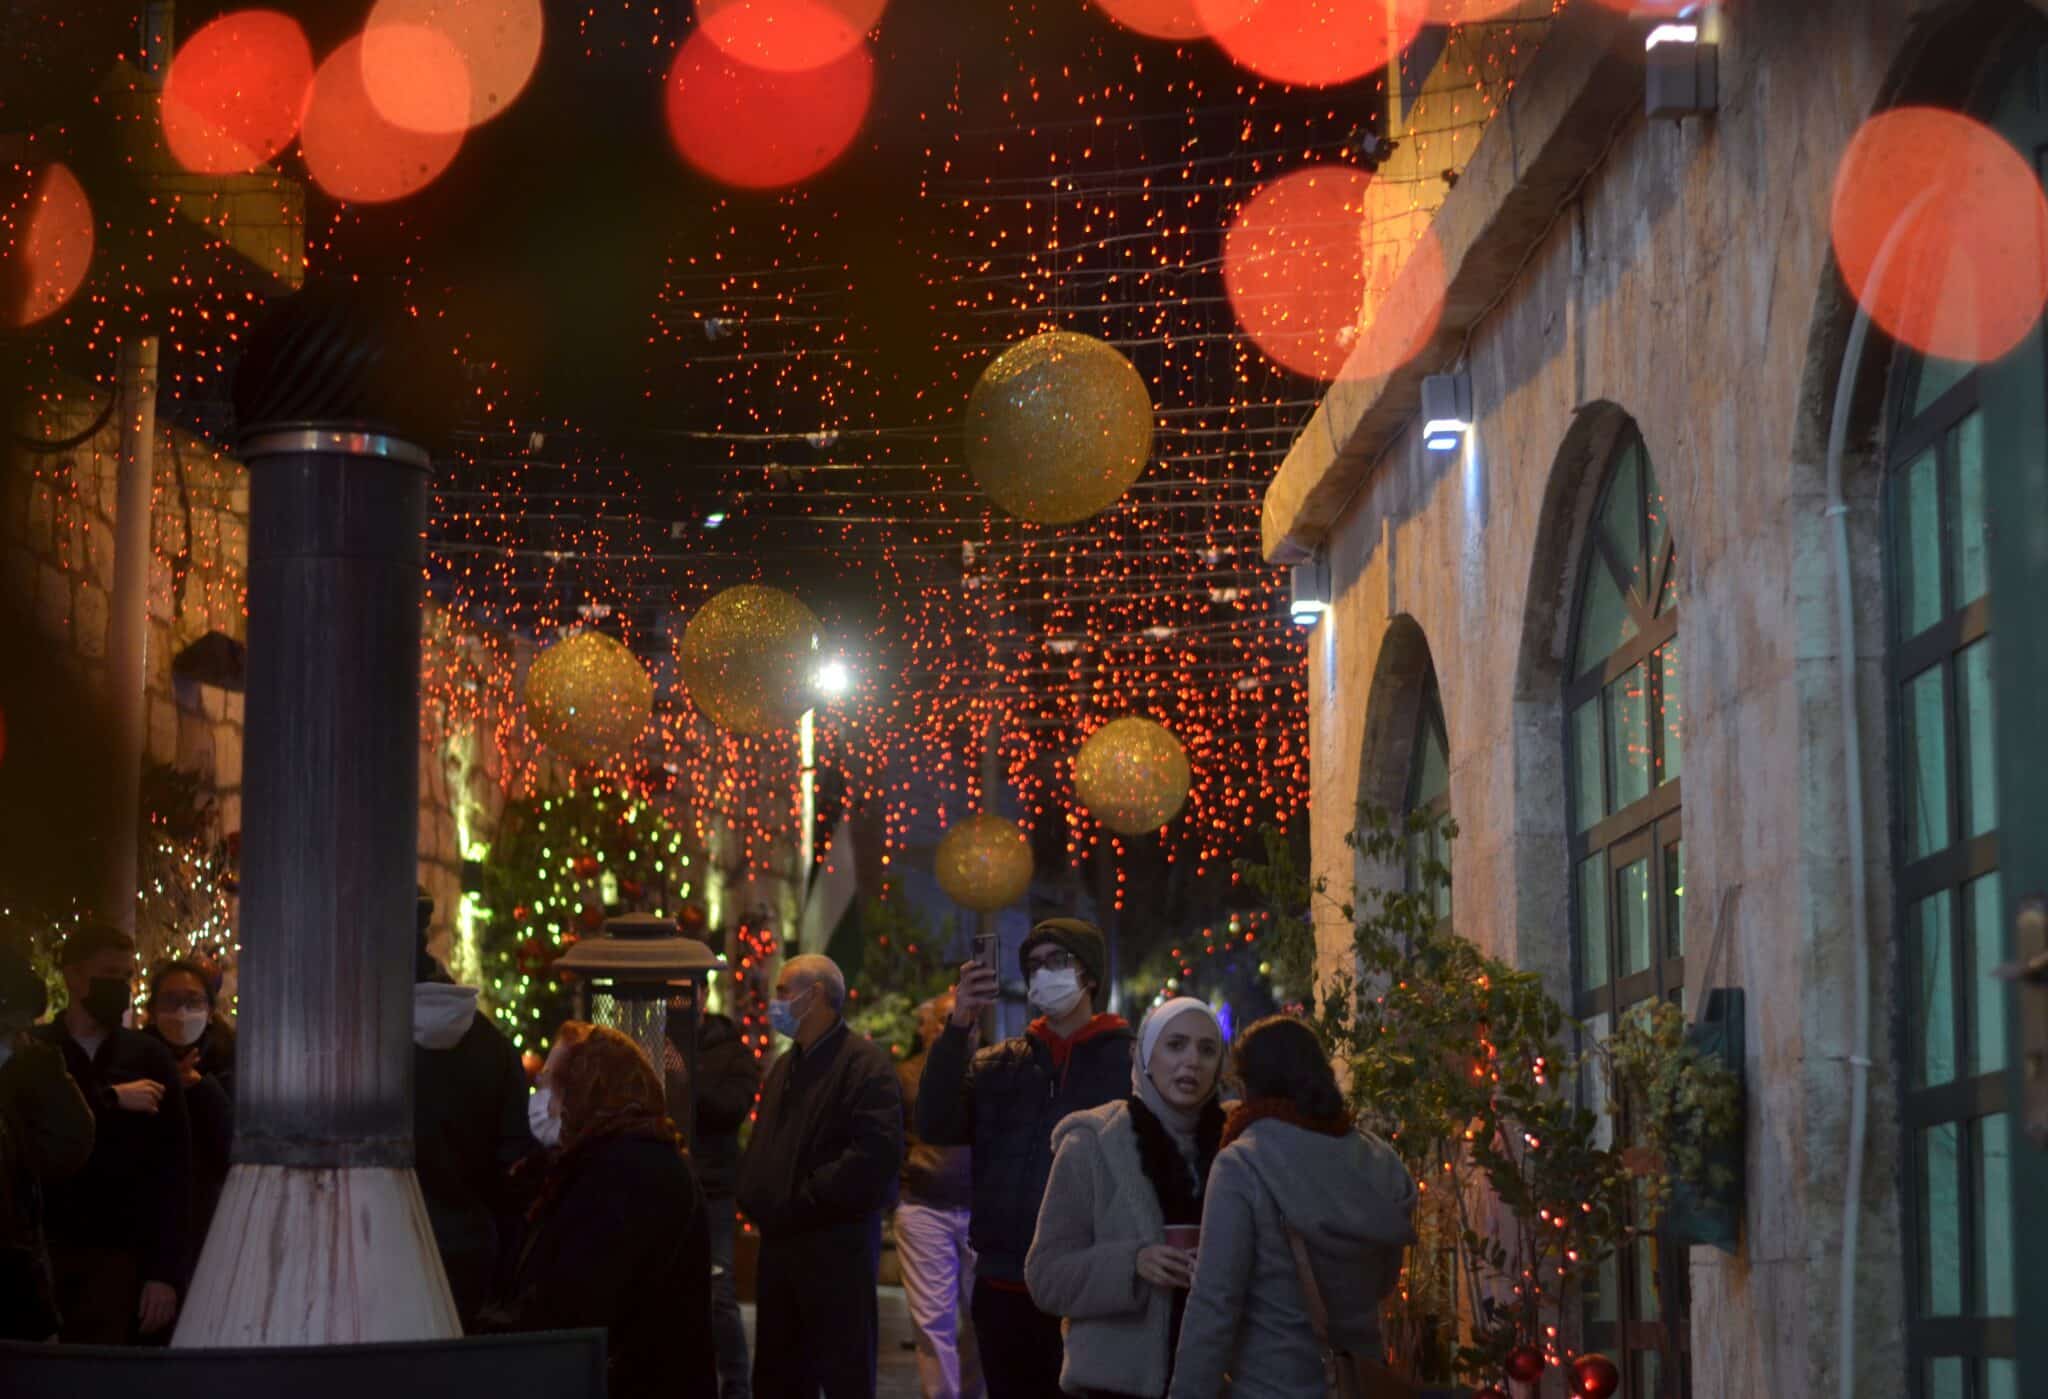 People visit a Christmas market in the city of Fuheis near Amman, Jordan, Dec. 18, 2021. Churches in Jordan are canceling 2023 Christmas celebrations in solidarity with Gaza as violence in the Palestinian enclave mounts, the leaders of Jordan's Council of Church Leaders announced Nov. 5. (OSV News photo/Muath Freij, Reuters)